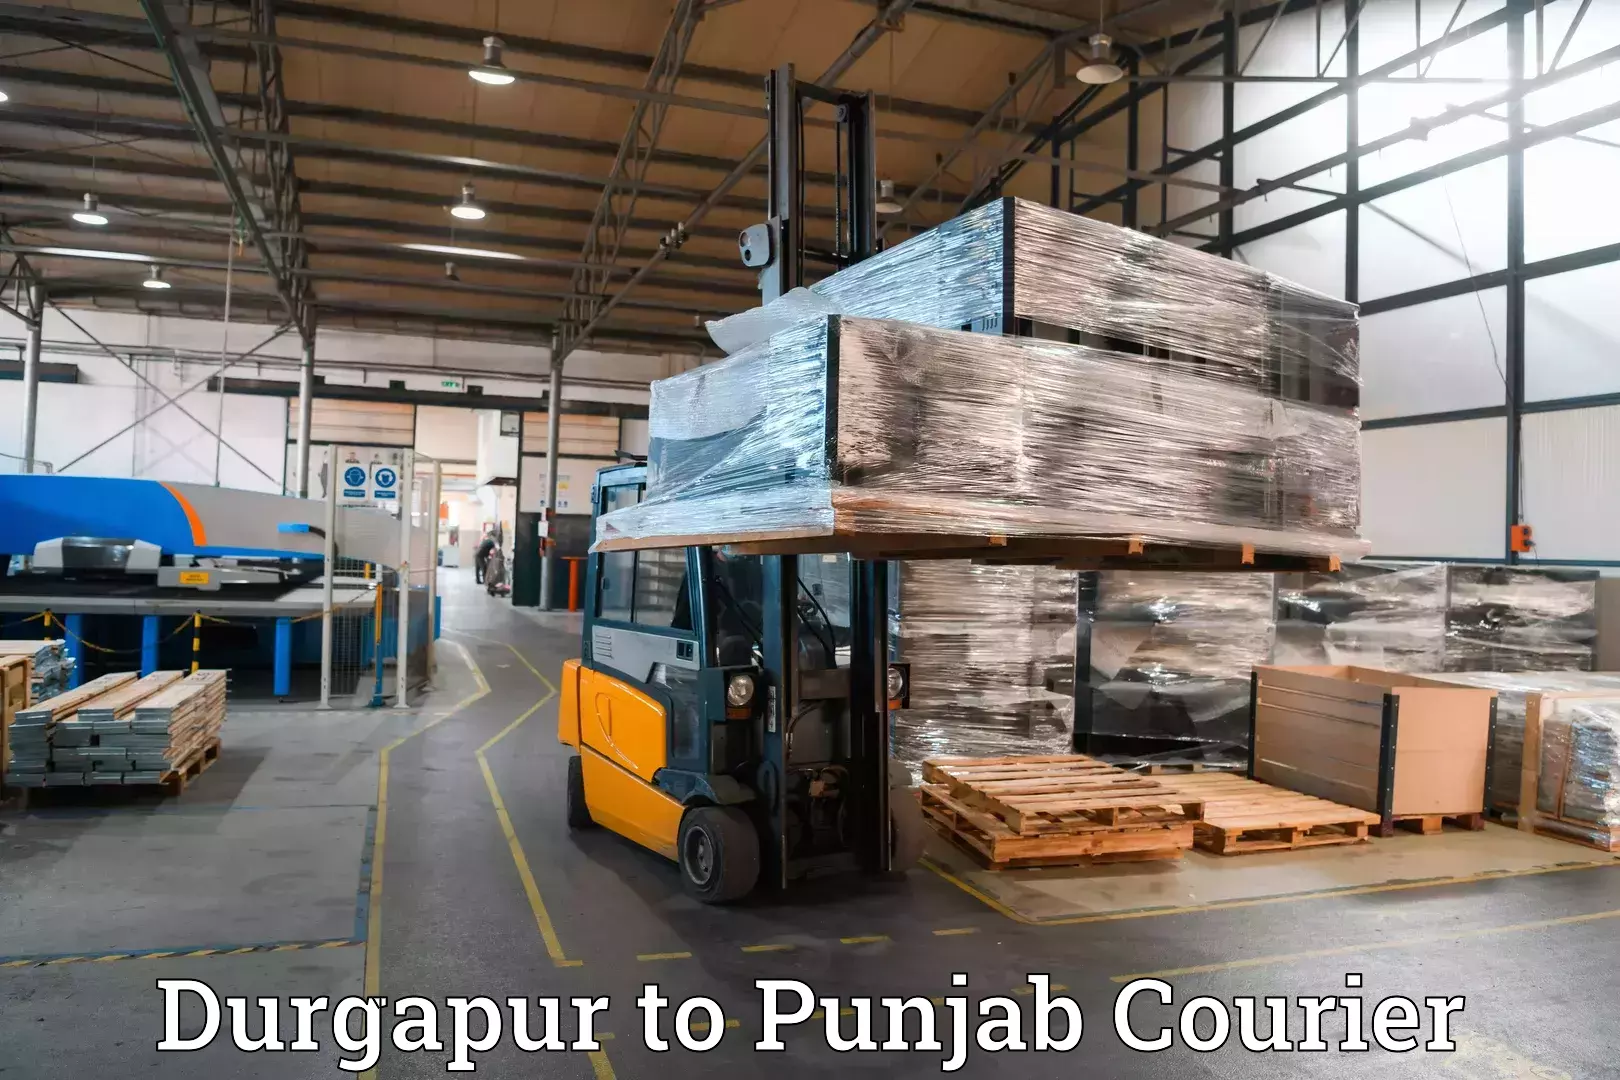 Weekend baggage shipping in Durgapur to Batala